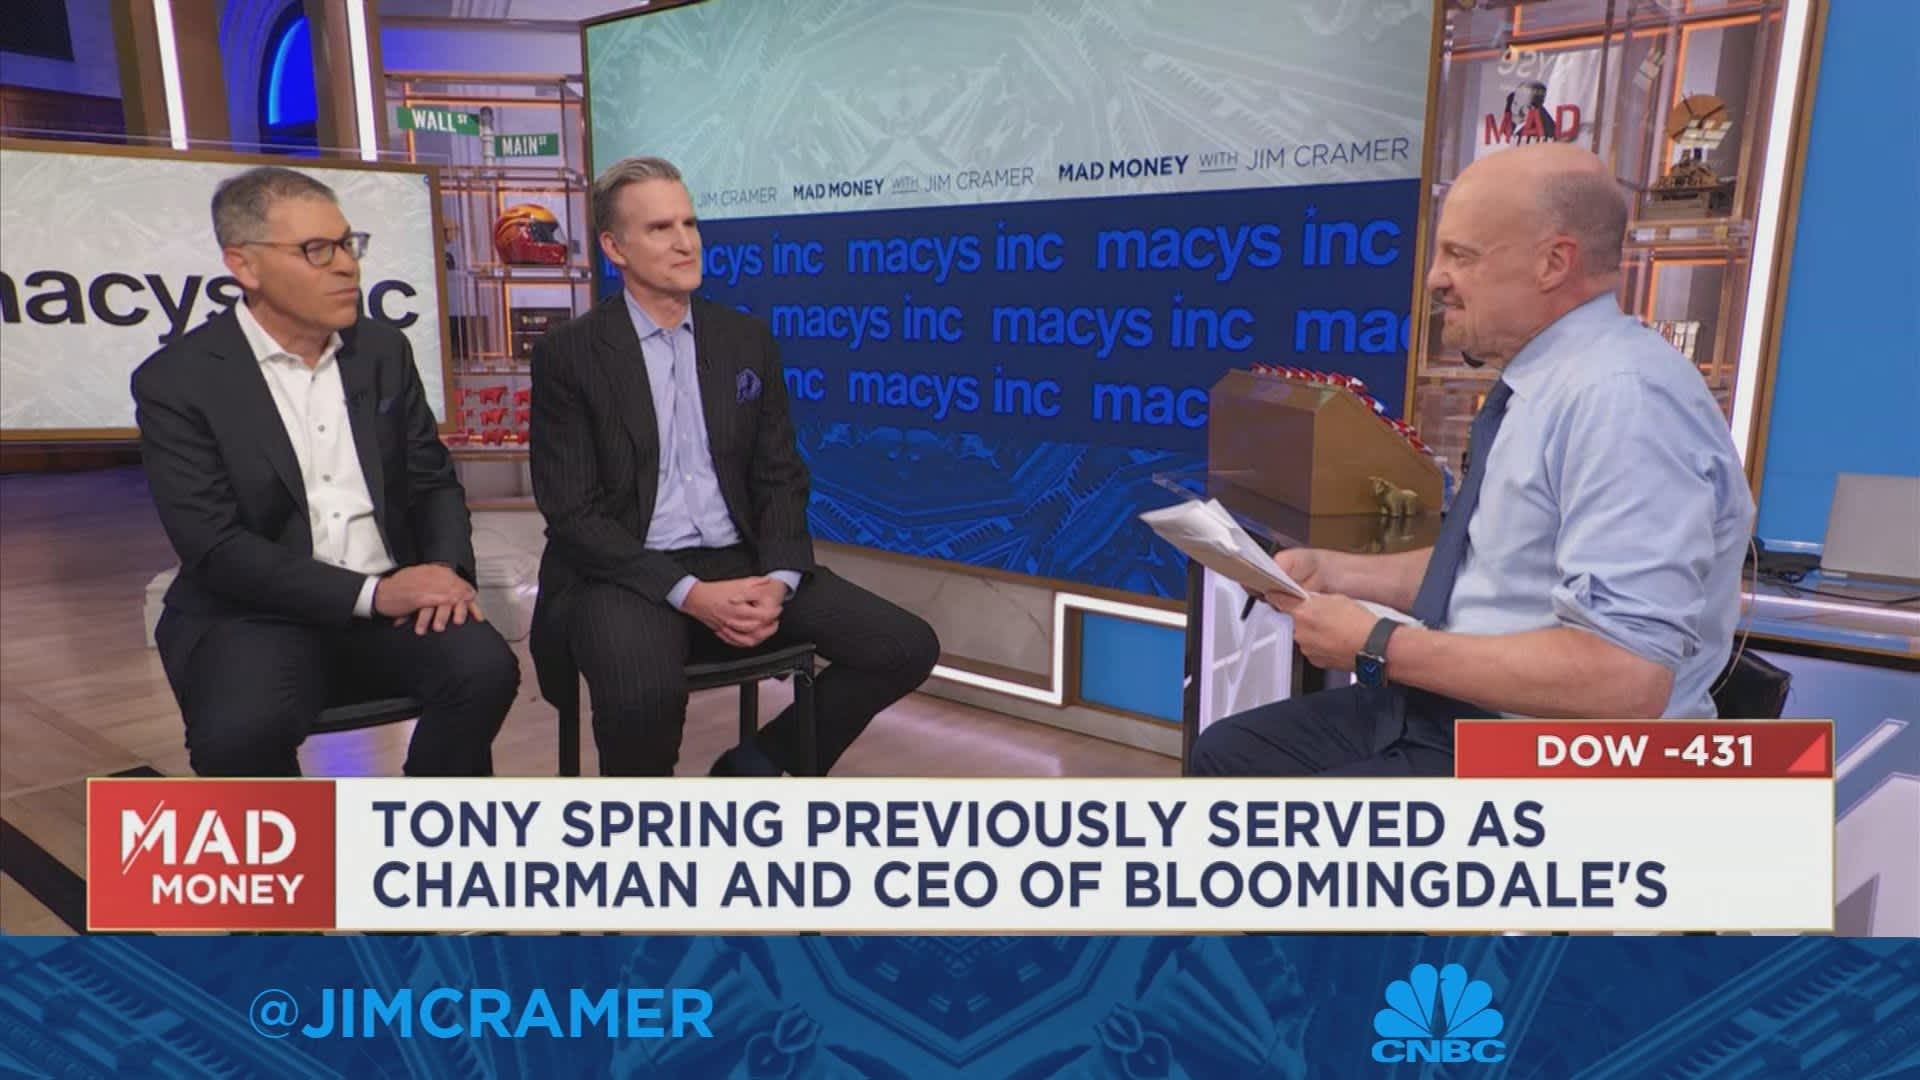 Jim Cramer sits down with Macy's outgoing and incoming CEOs